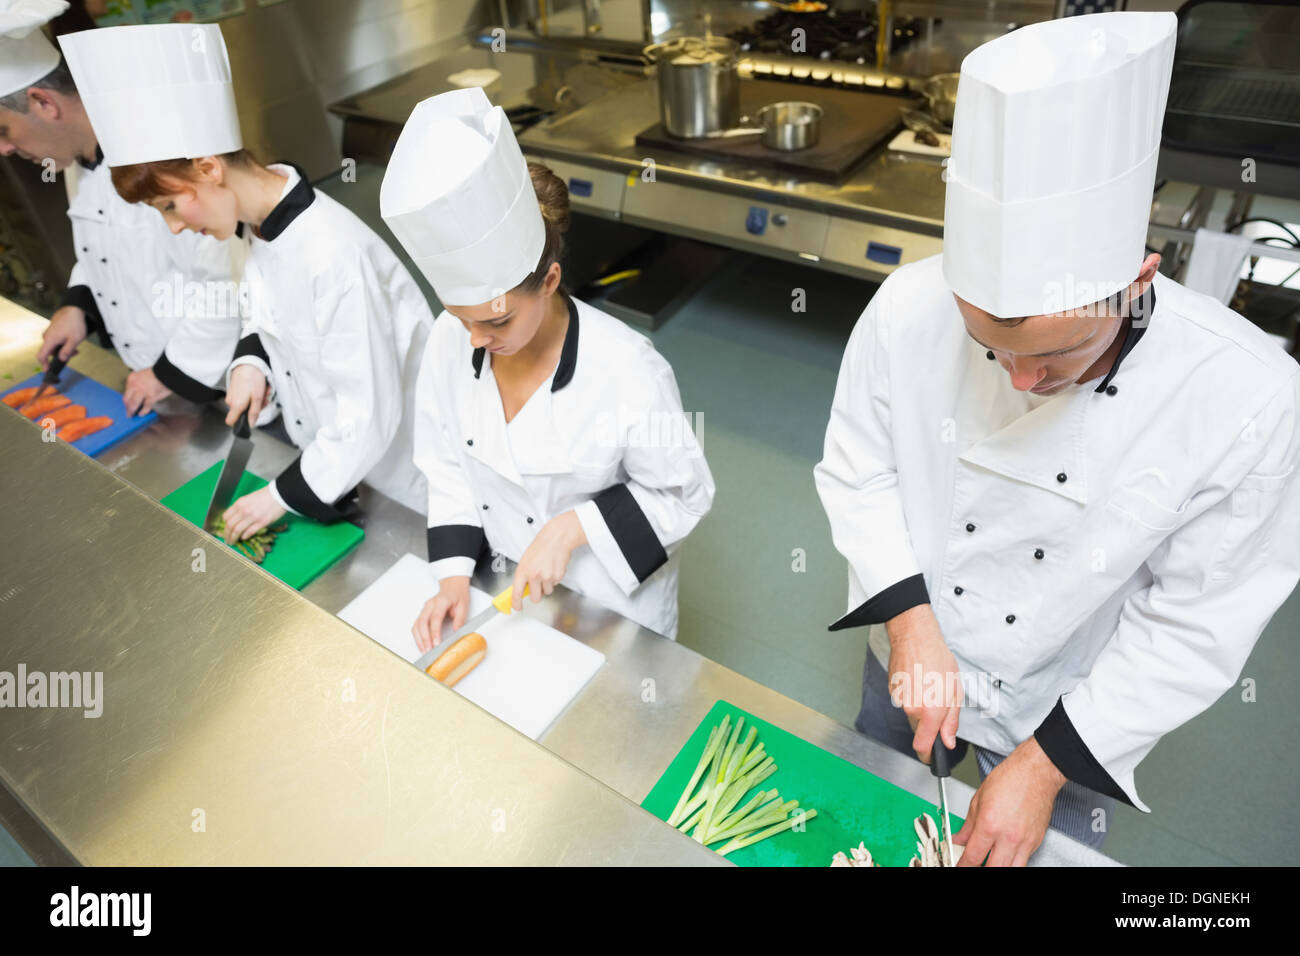 Four chefs preparing food at counter Stock Photo